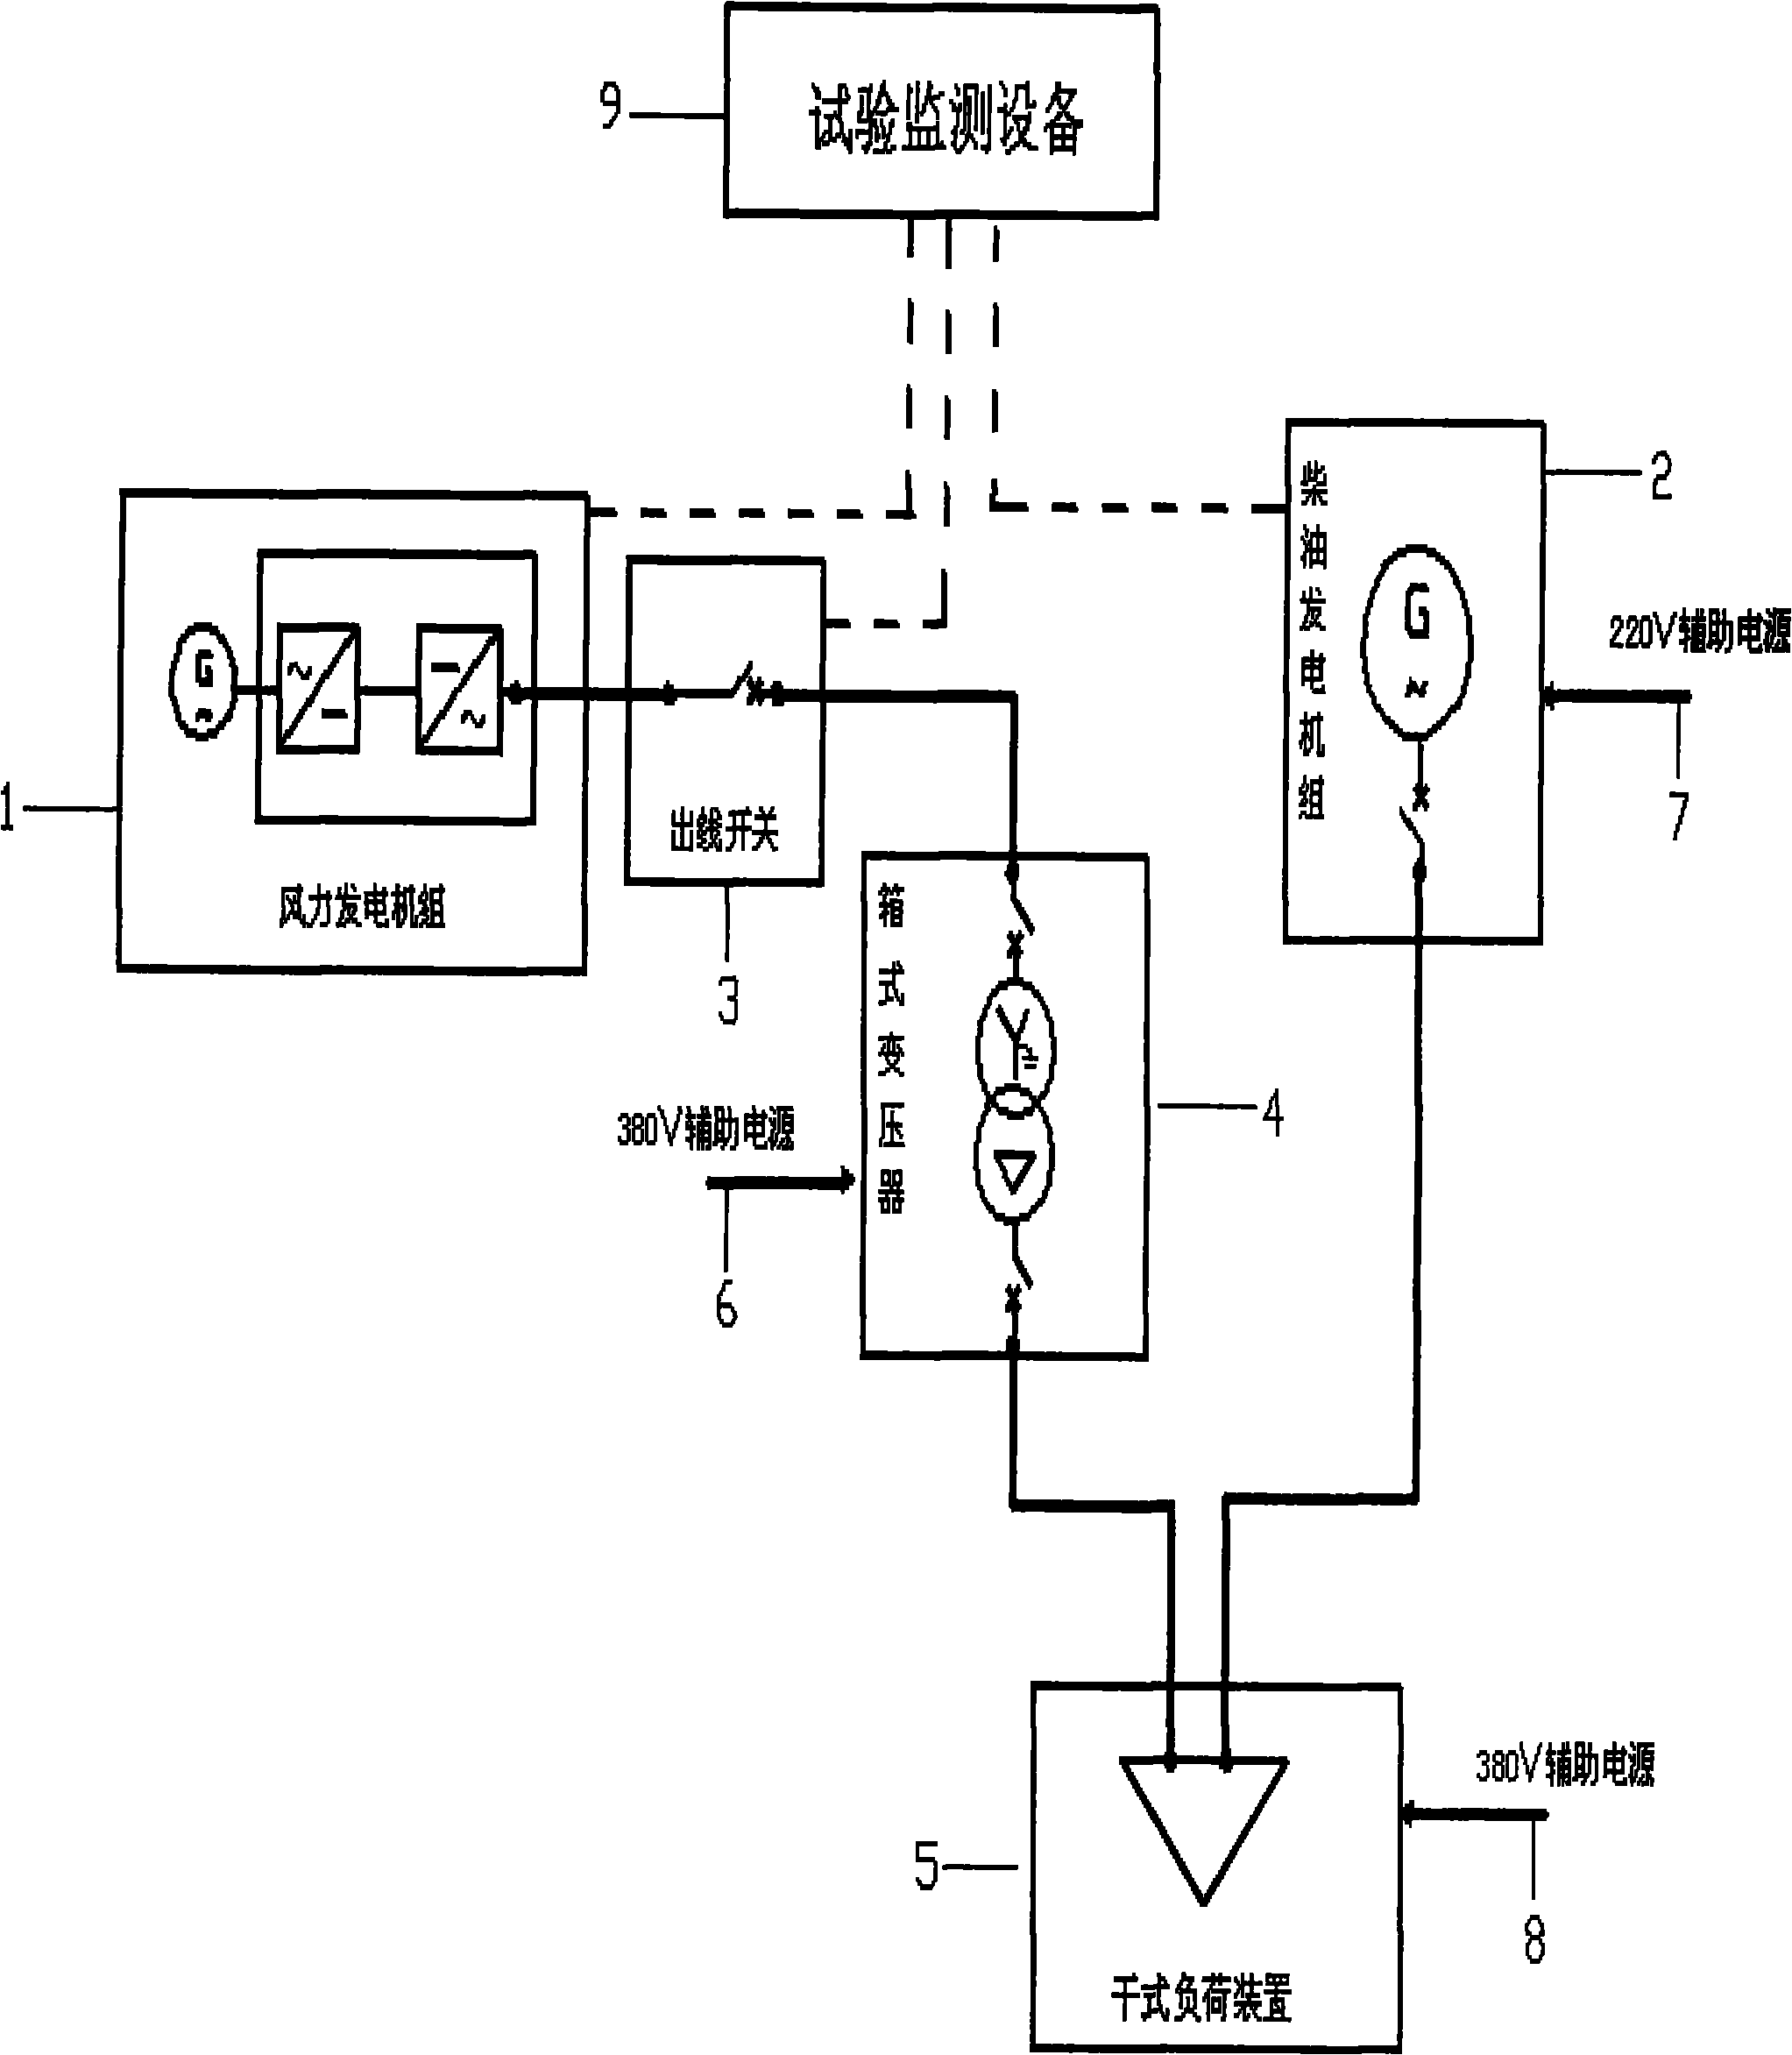 Wind-driven generating set and offshore platform grid non-stop grid connection test system and method